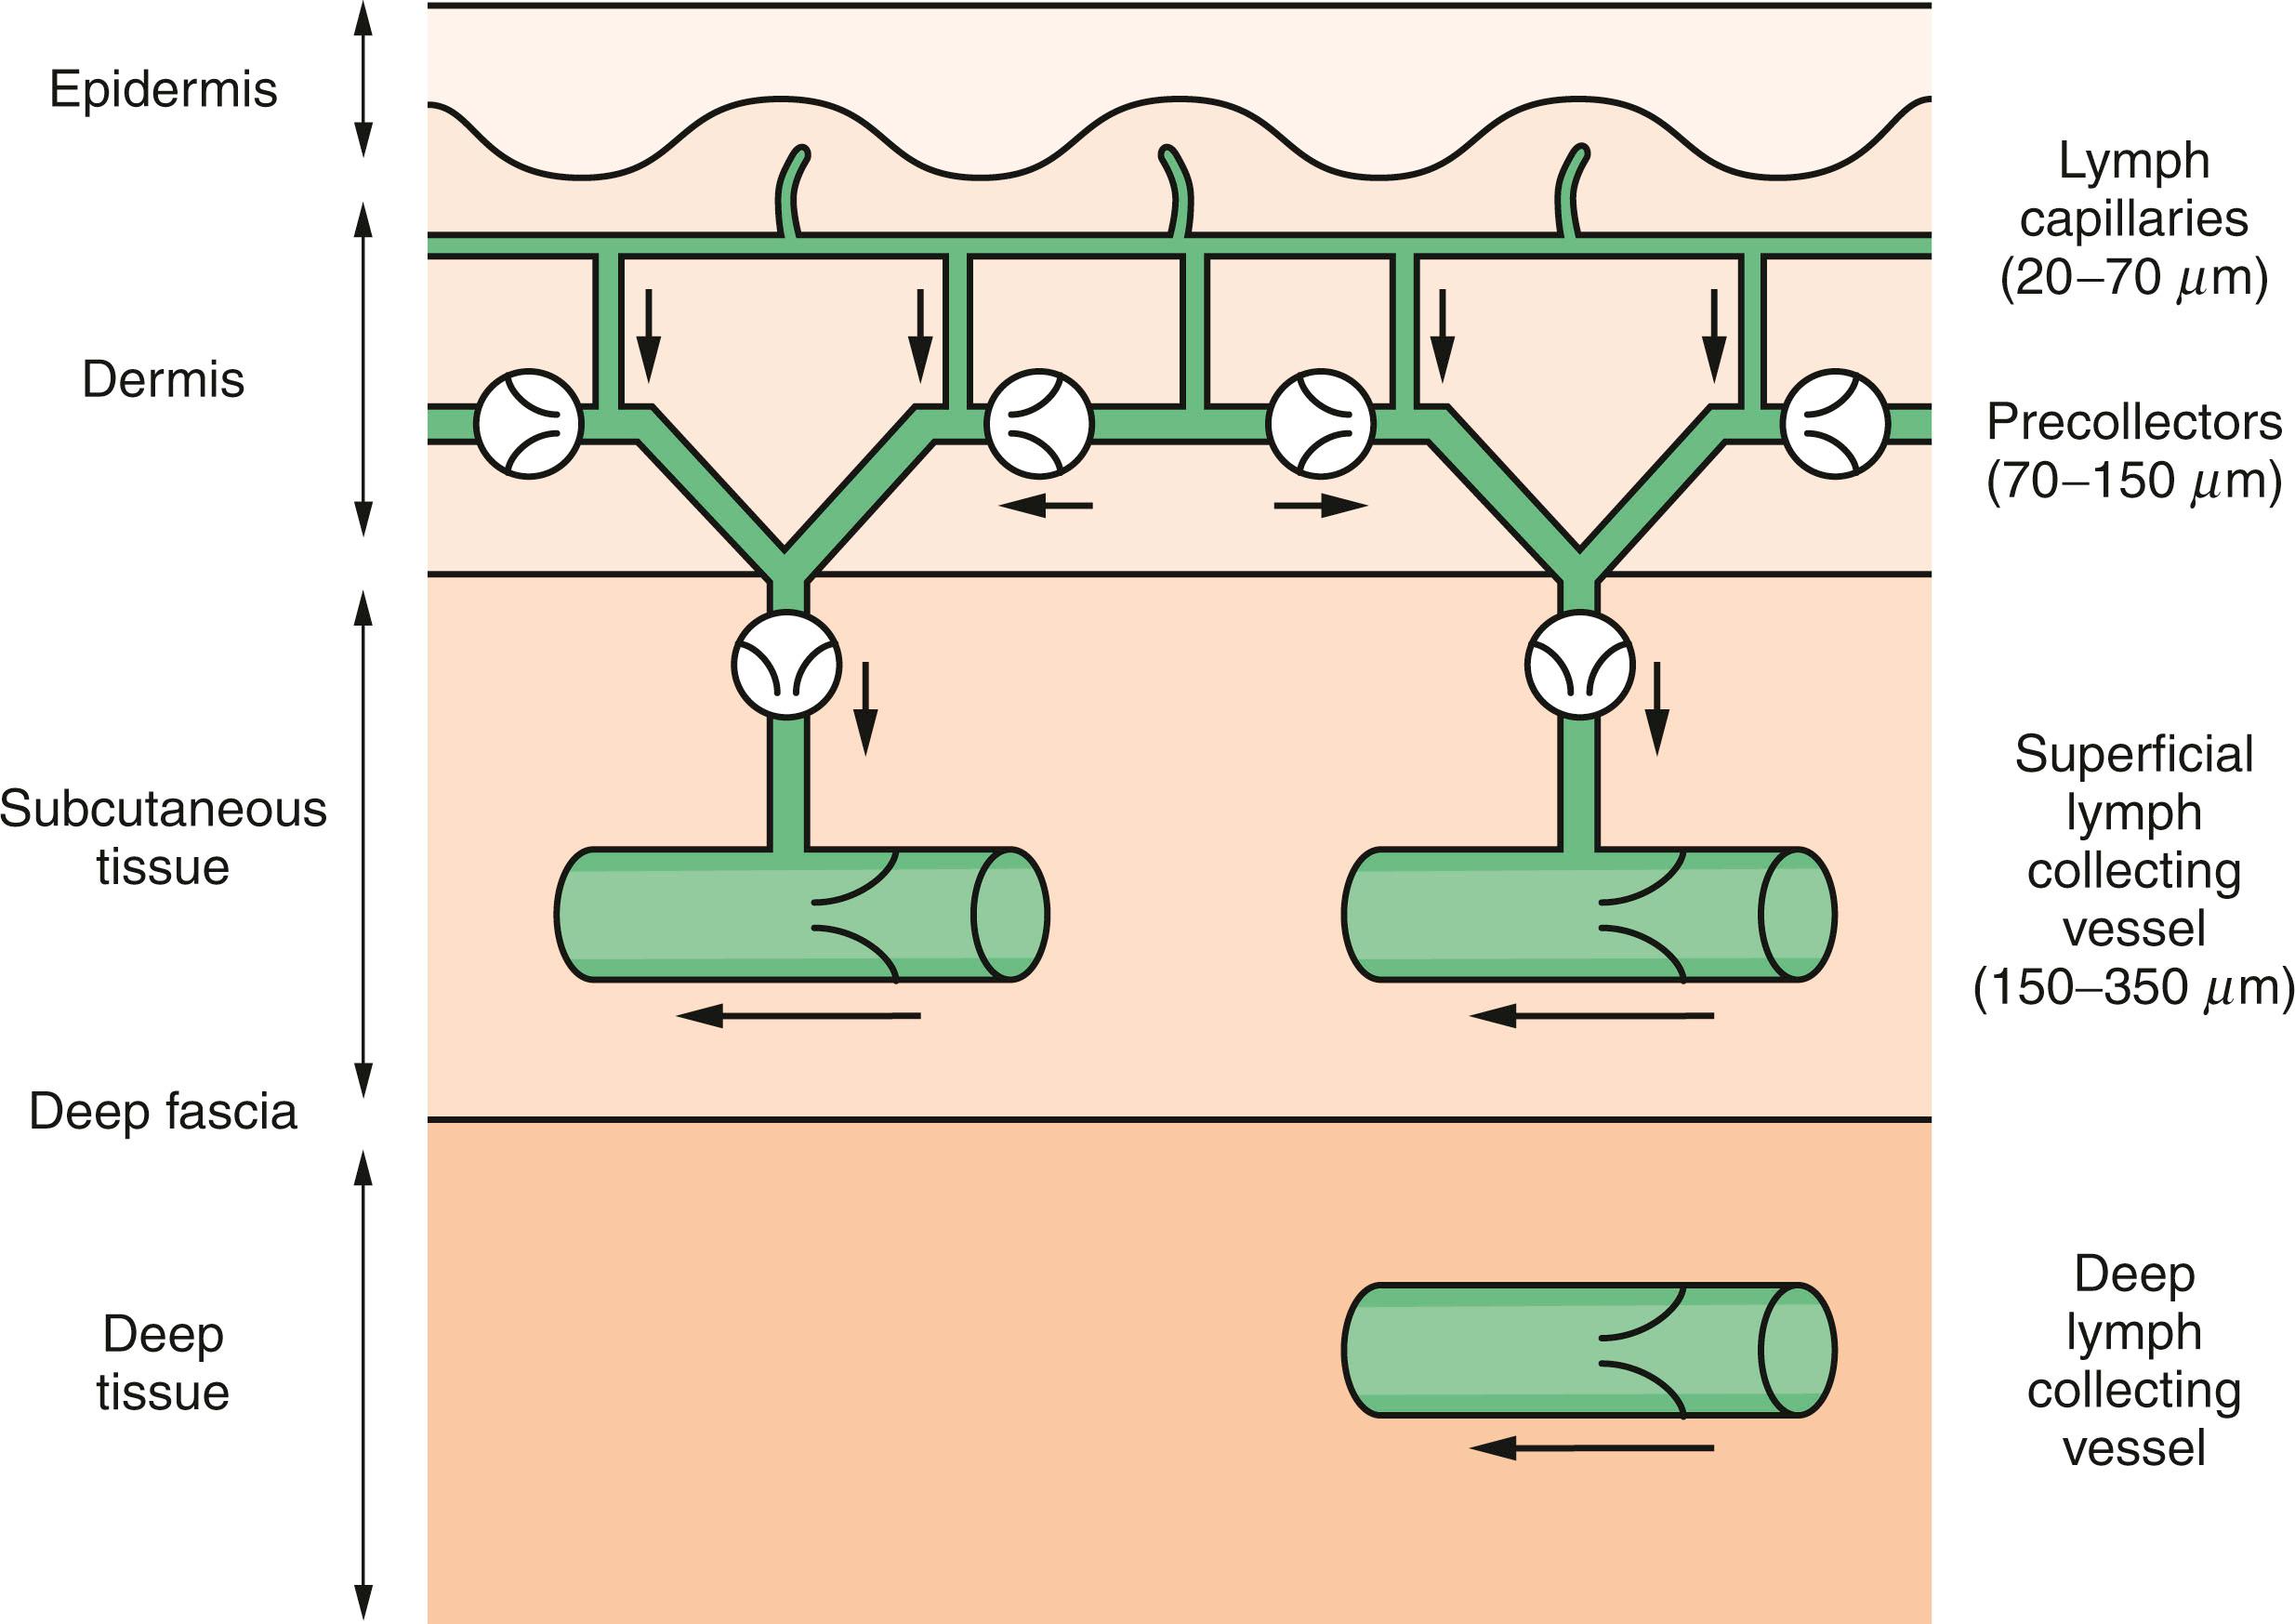 Fig. 76.4, Schematic diagram of the relationship between the lymph capillaries, precollectors, and lymph collecting vessels.